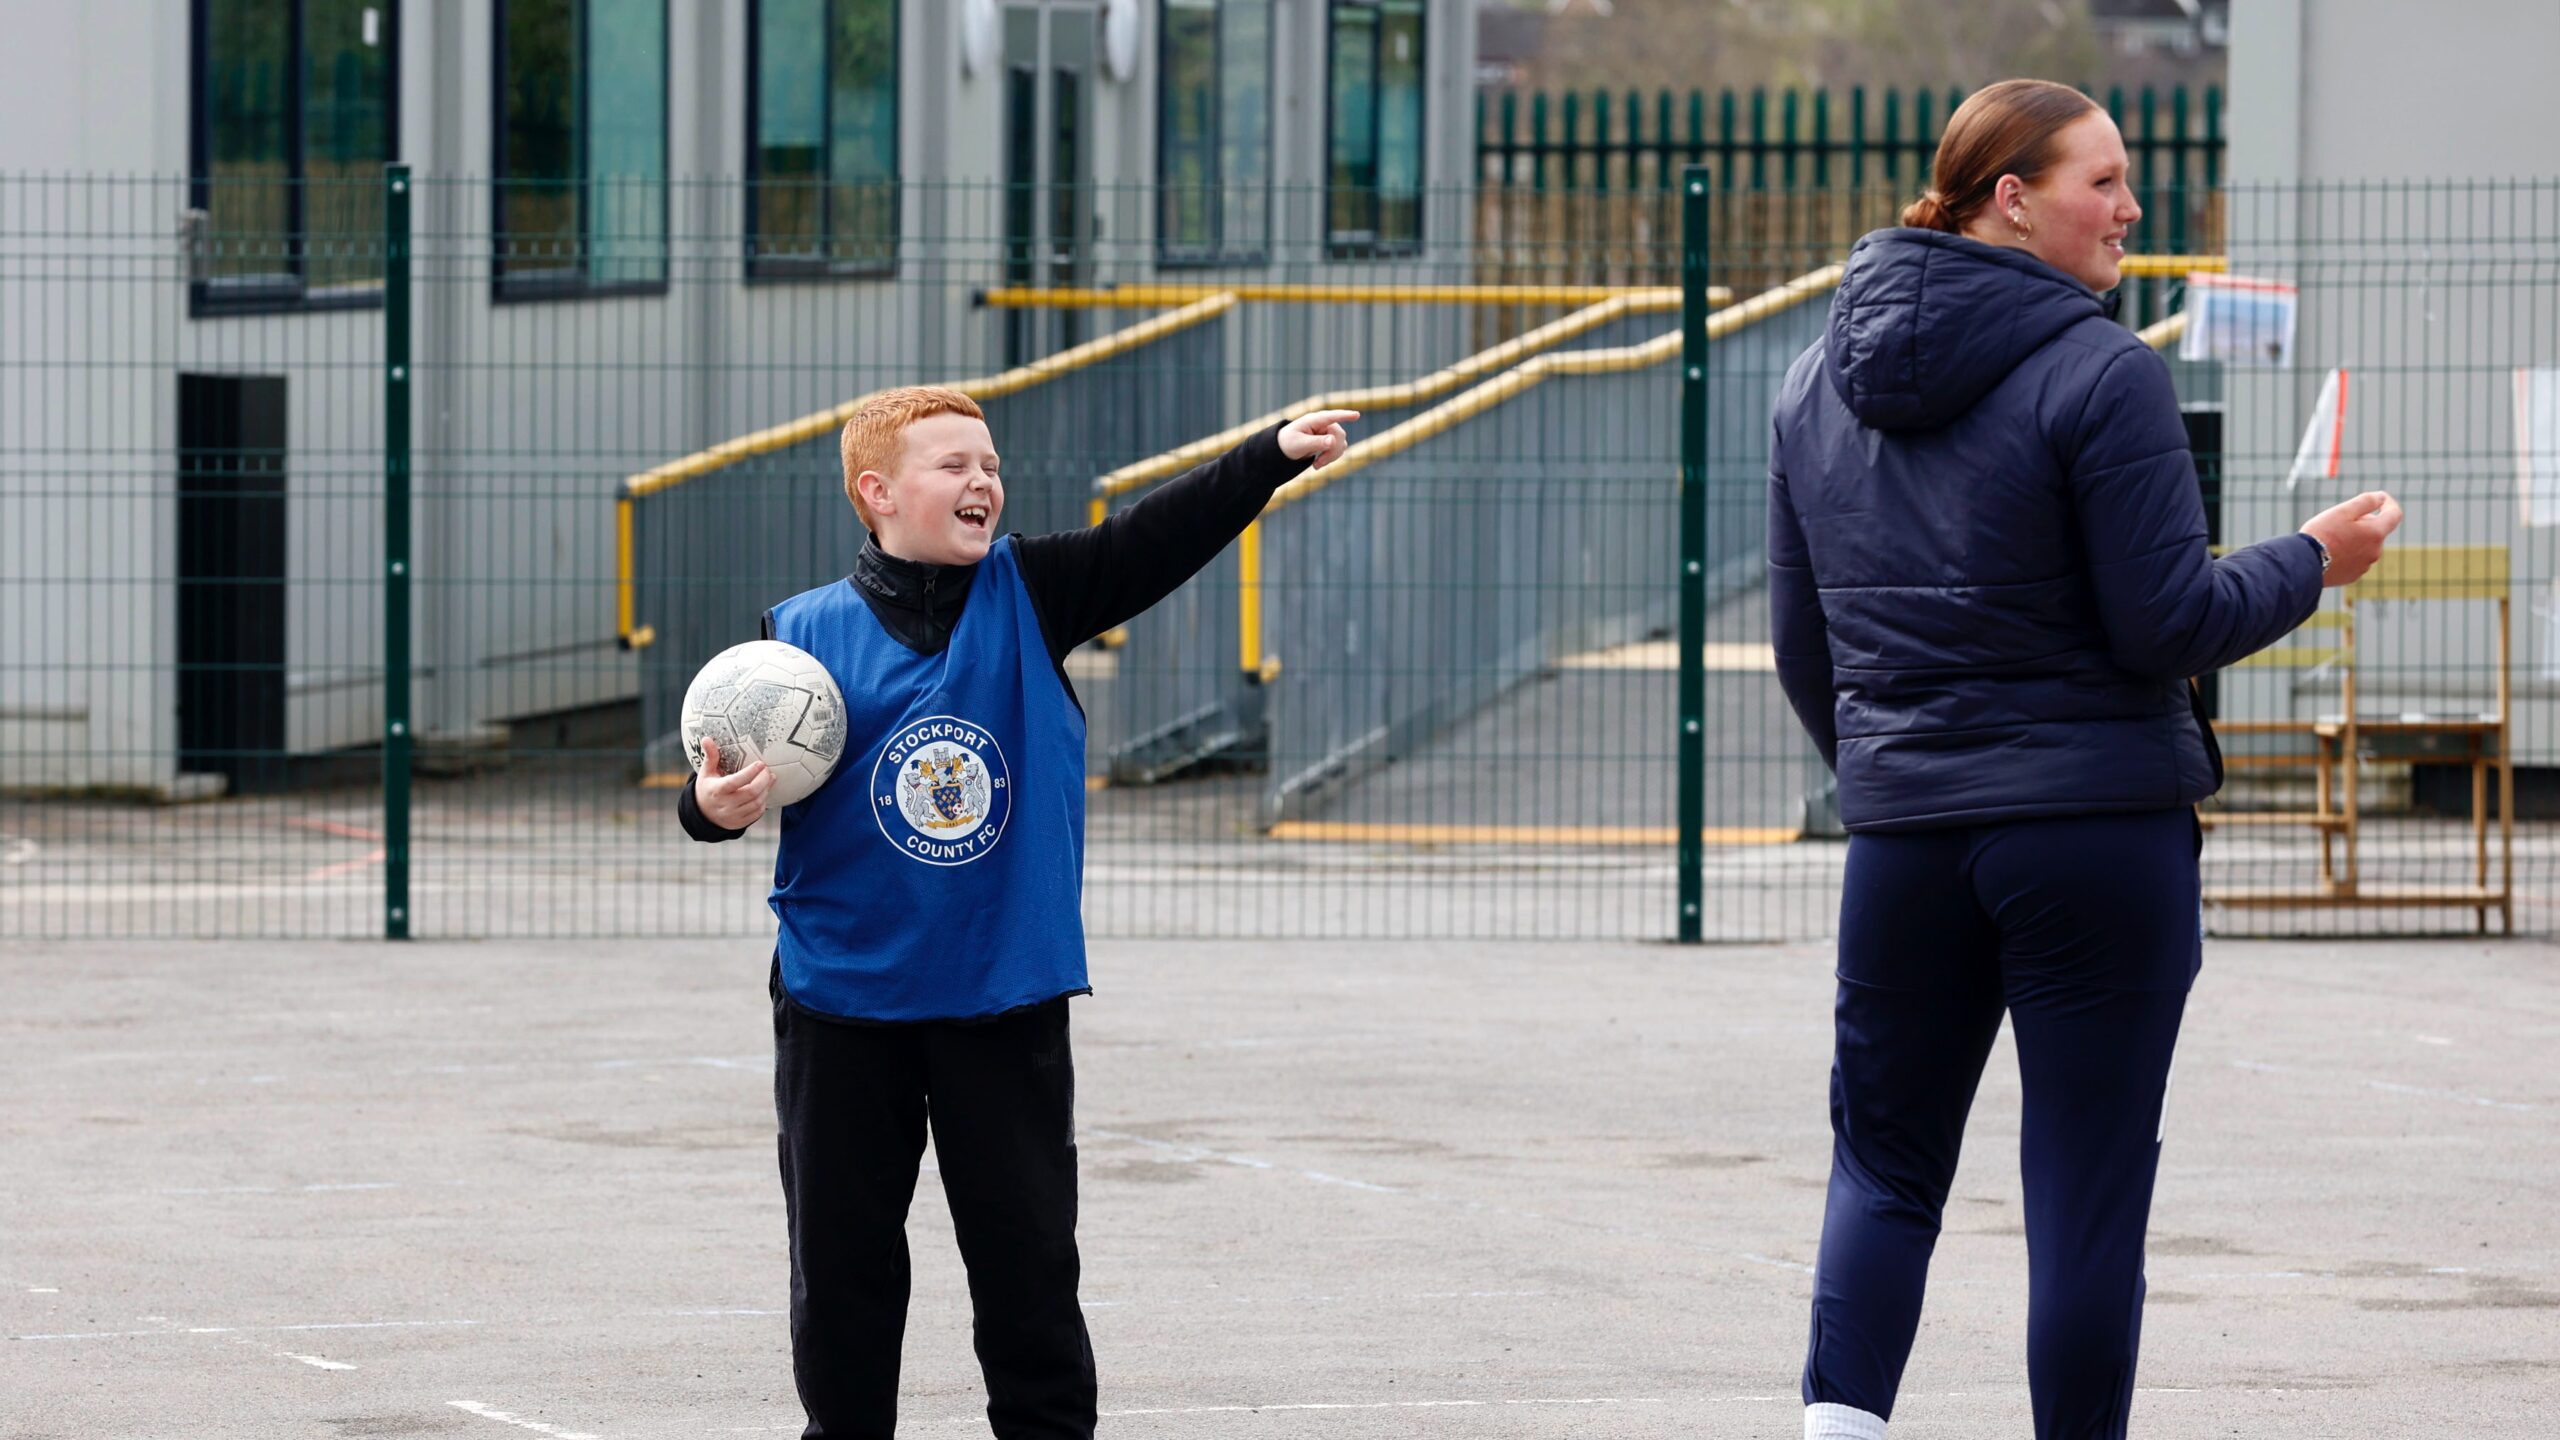 Stockport County giving free PE kits to local kids